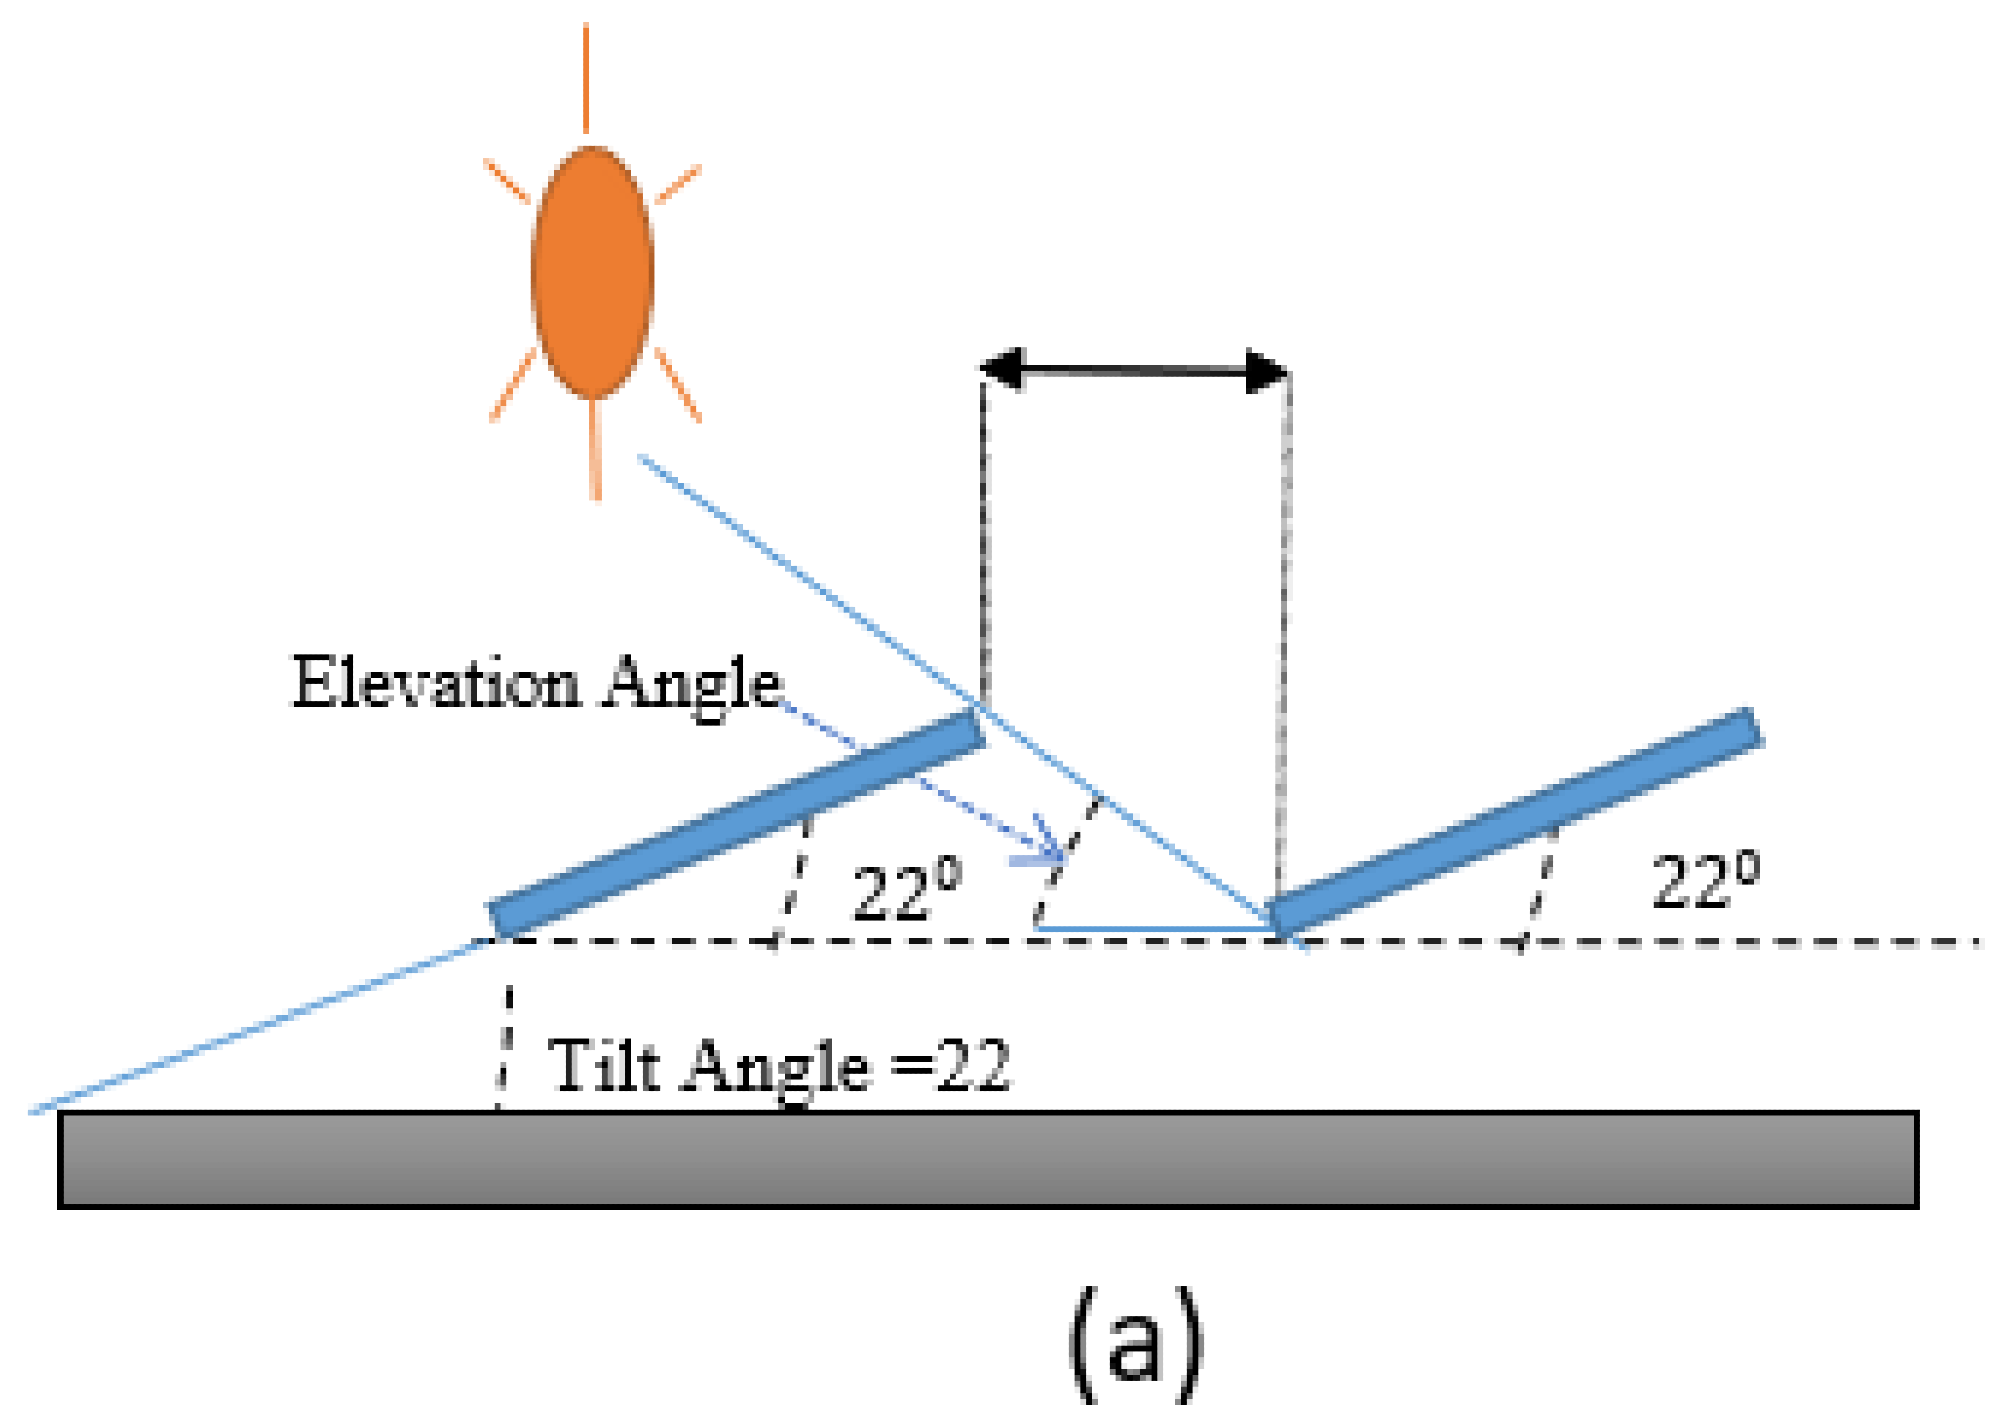 Relationship between elevation angle and spacing between rows: (a) Scenario 1, (b) Scenario 2, (c) Scenario 3.